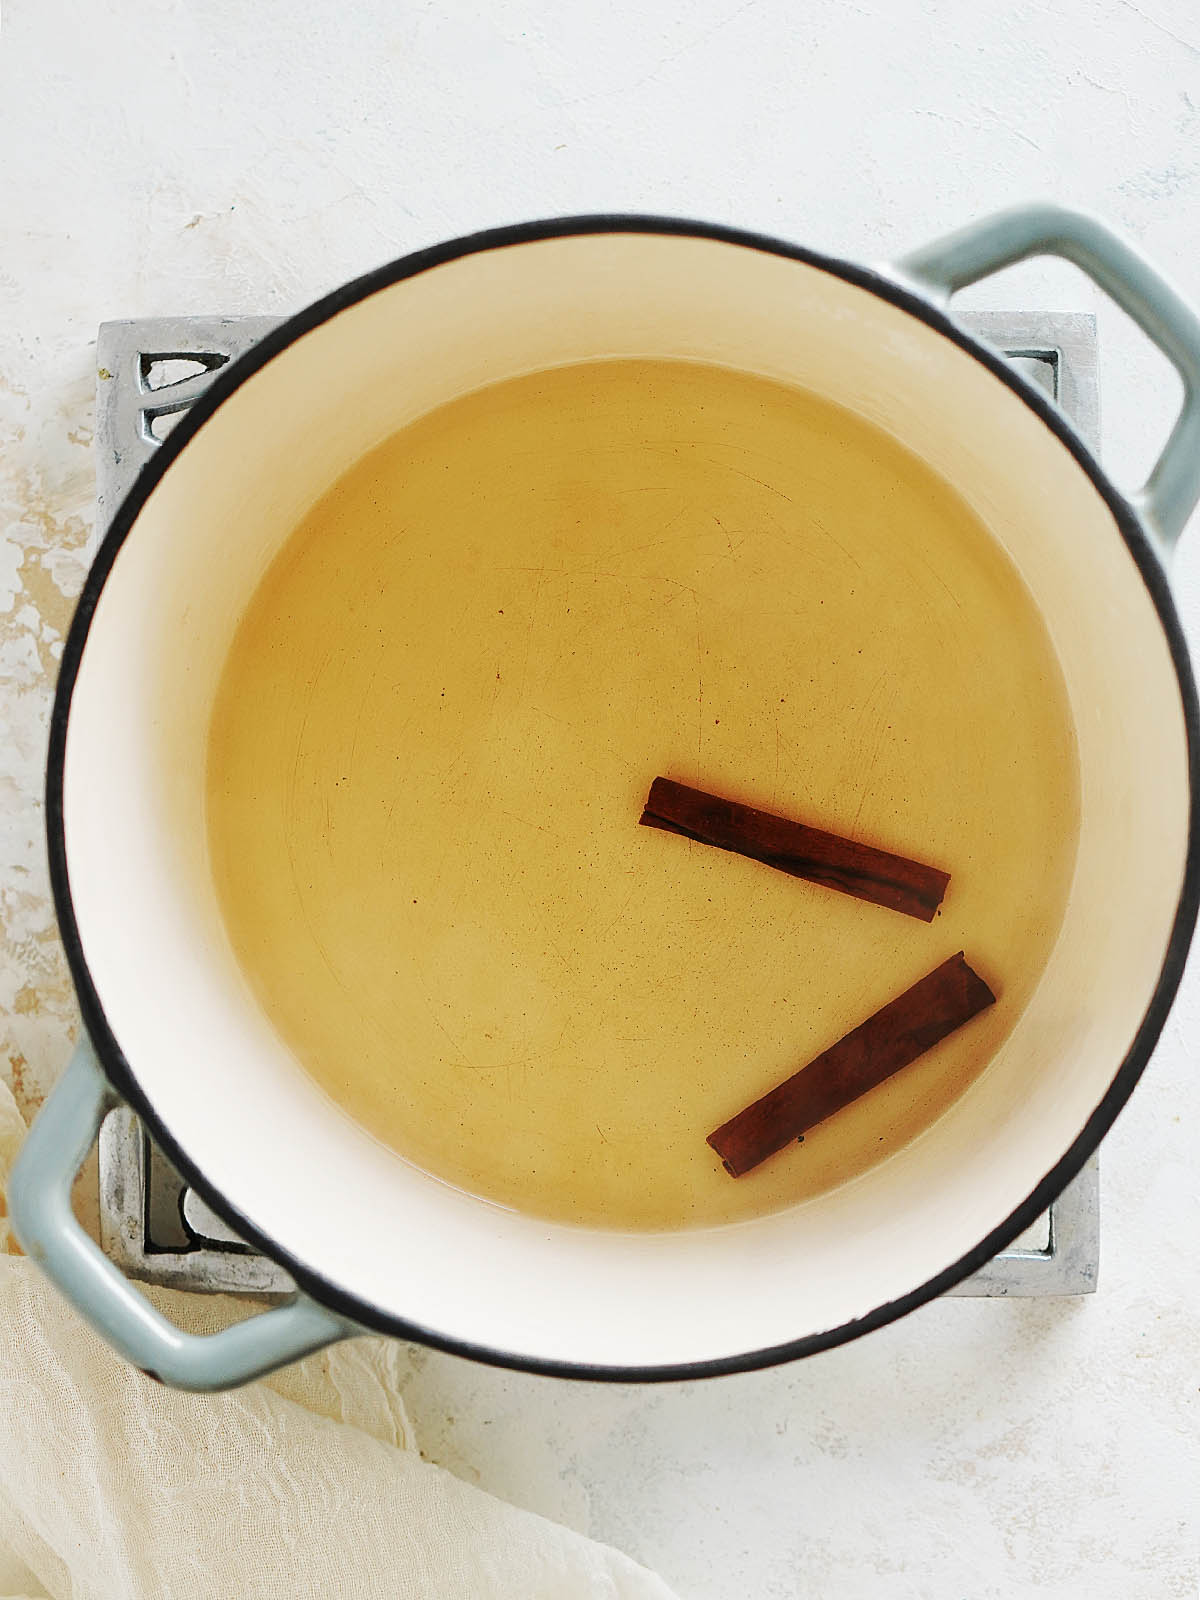 A medium pot with water and cinnamon sticks.